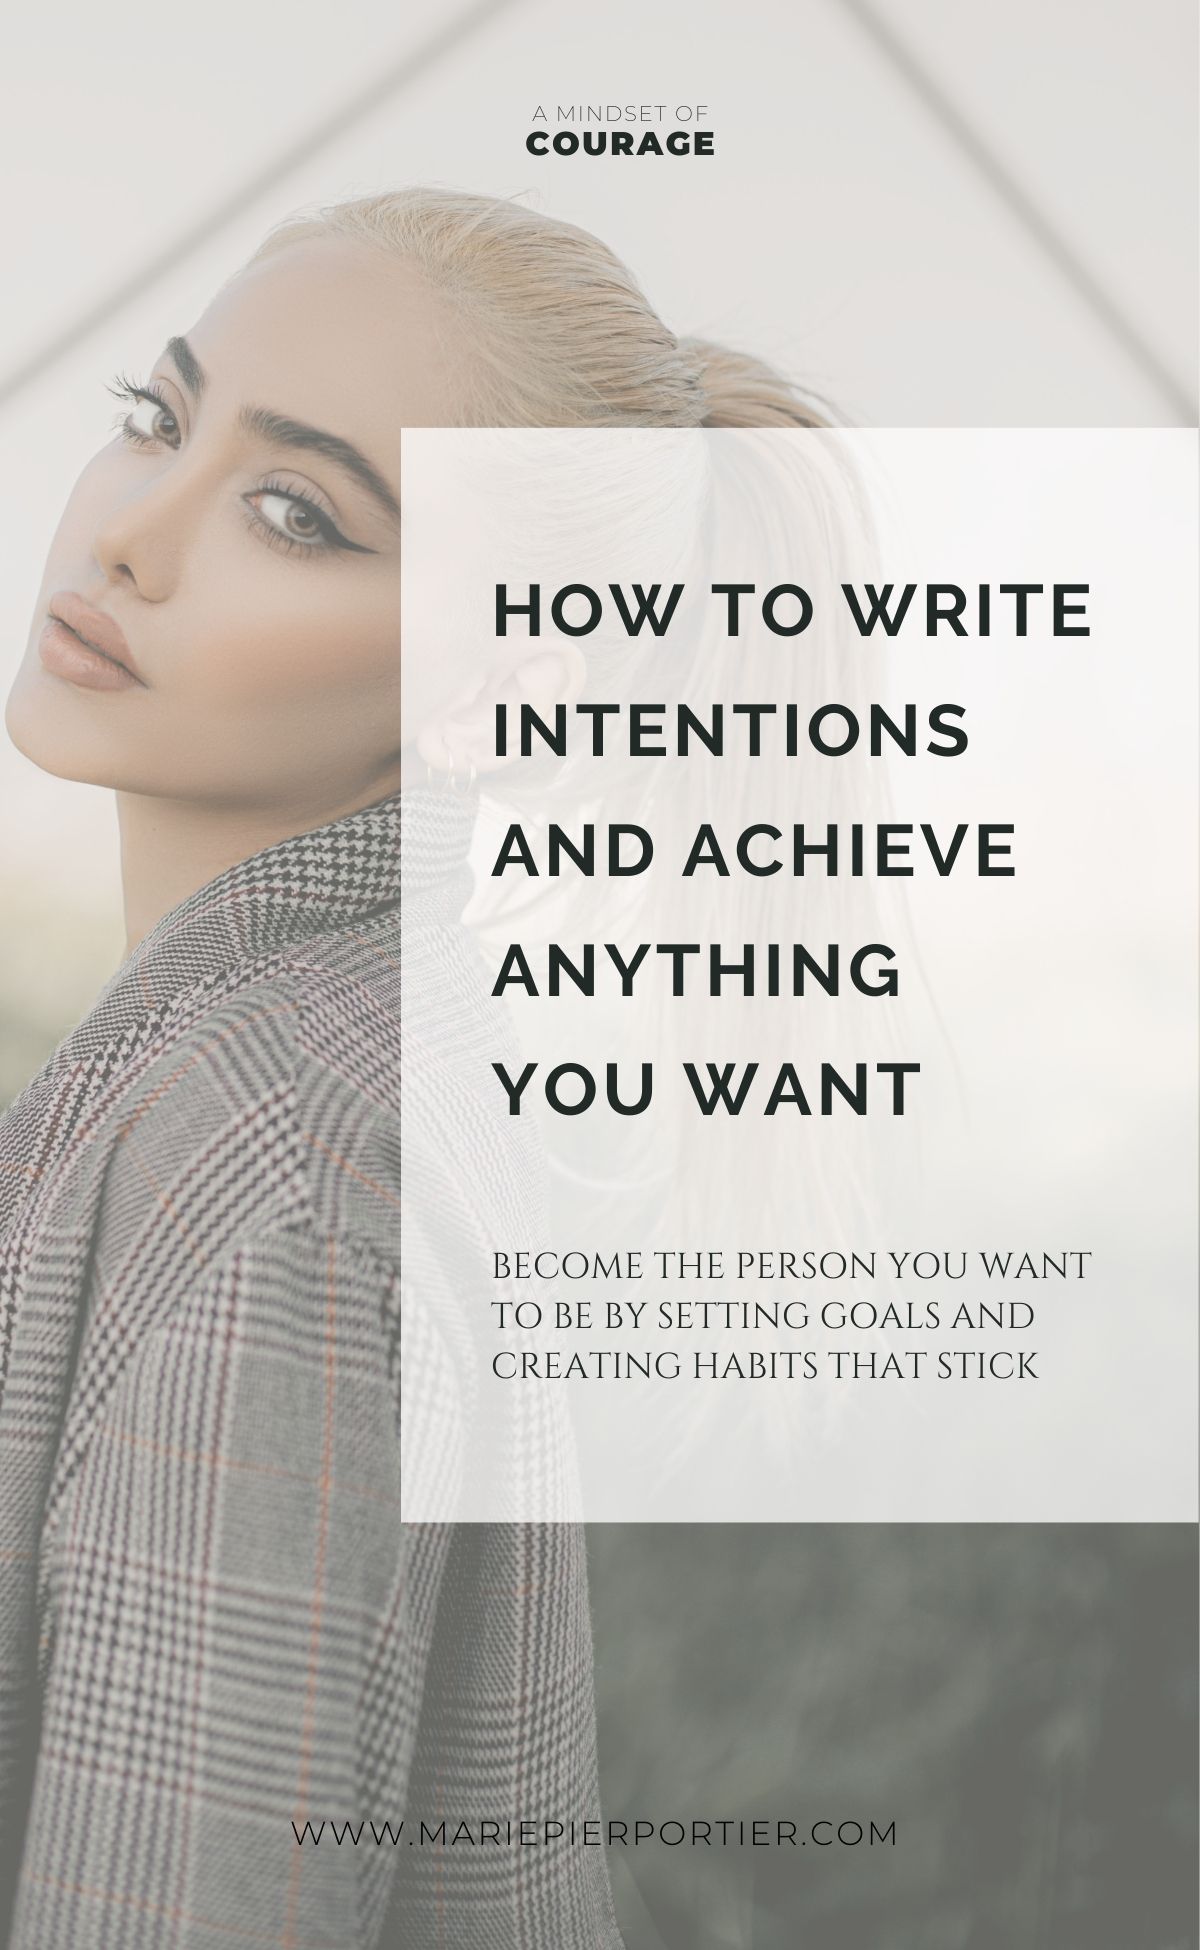 How to Write Intentions To Achieve Anything You Want